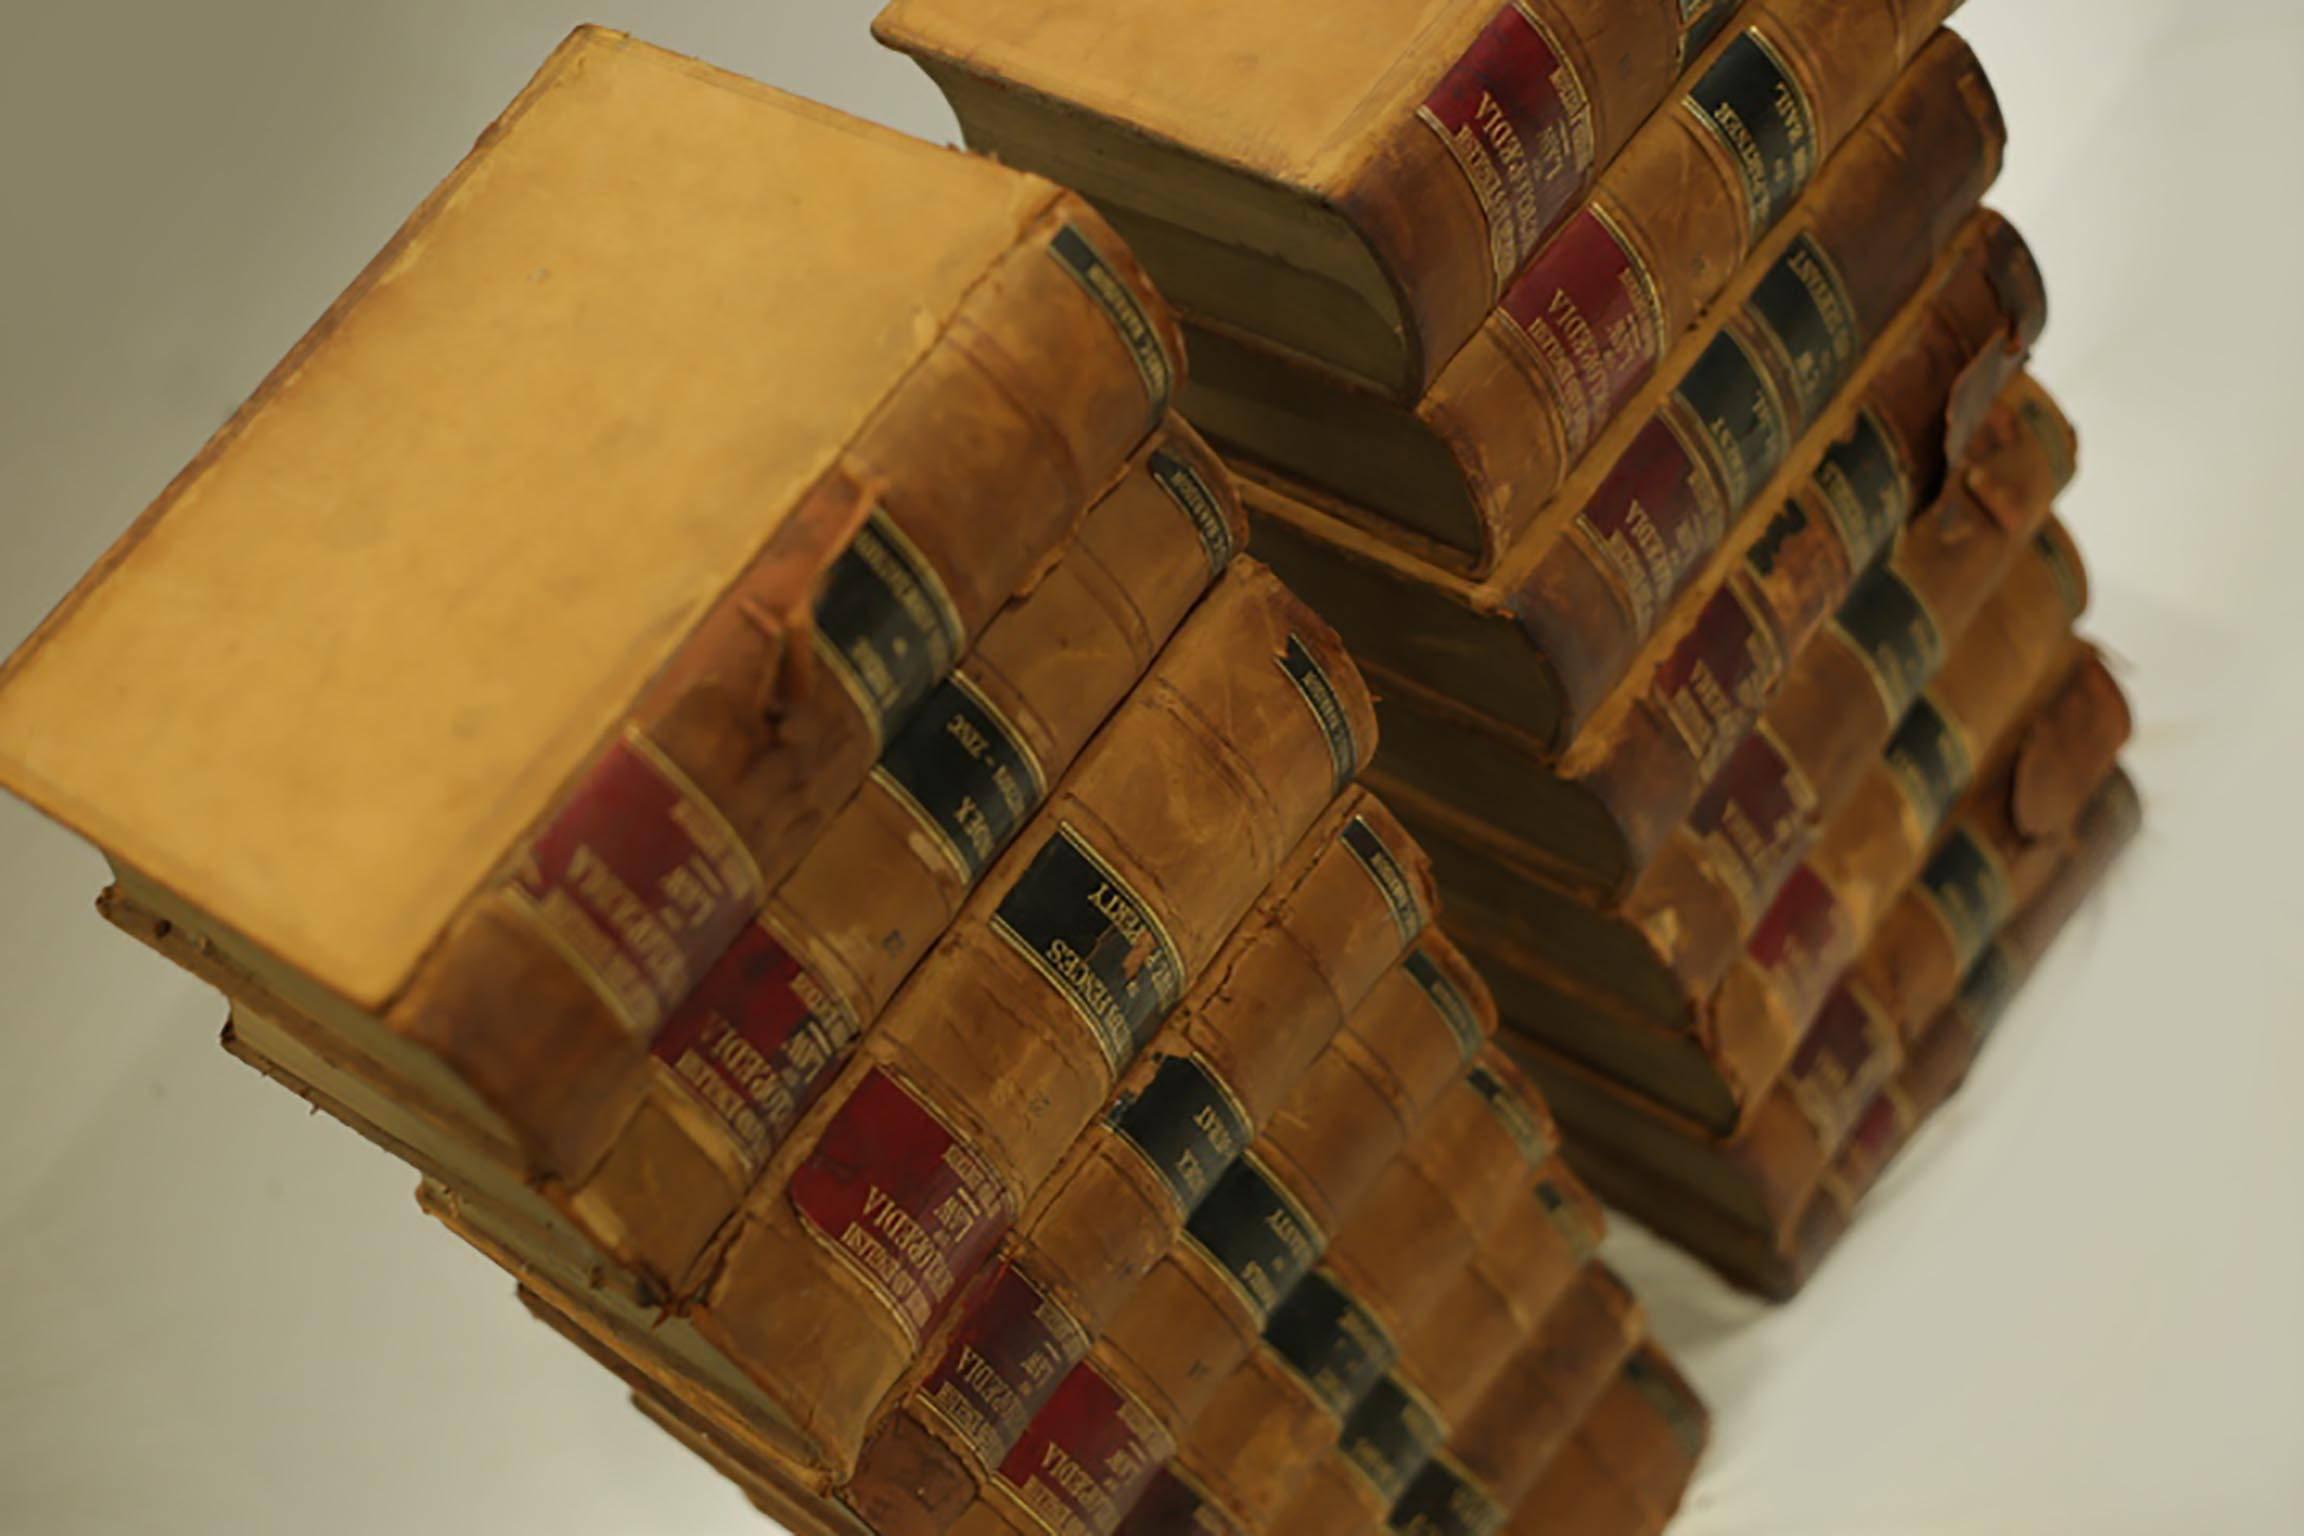 Set of 11 leather bound turn of the century law books that cover various topics such as 